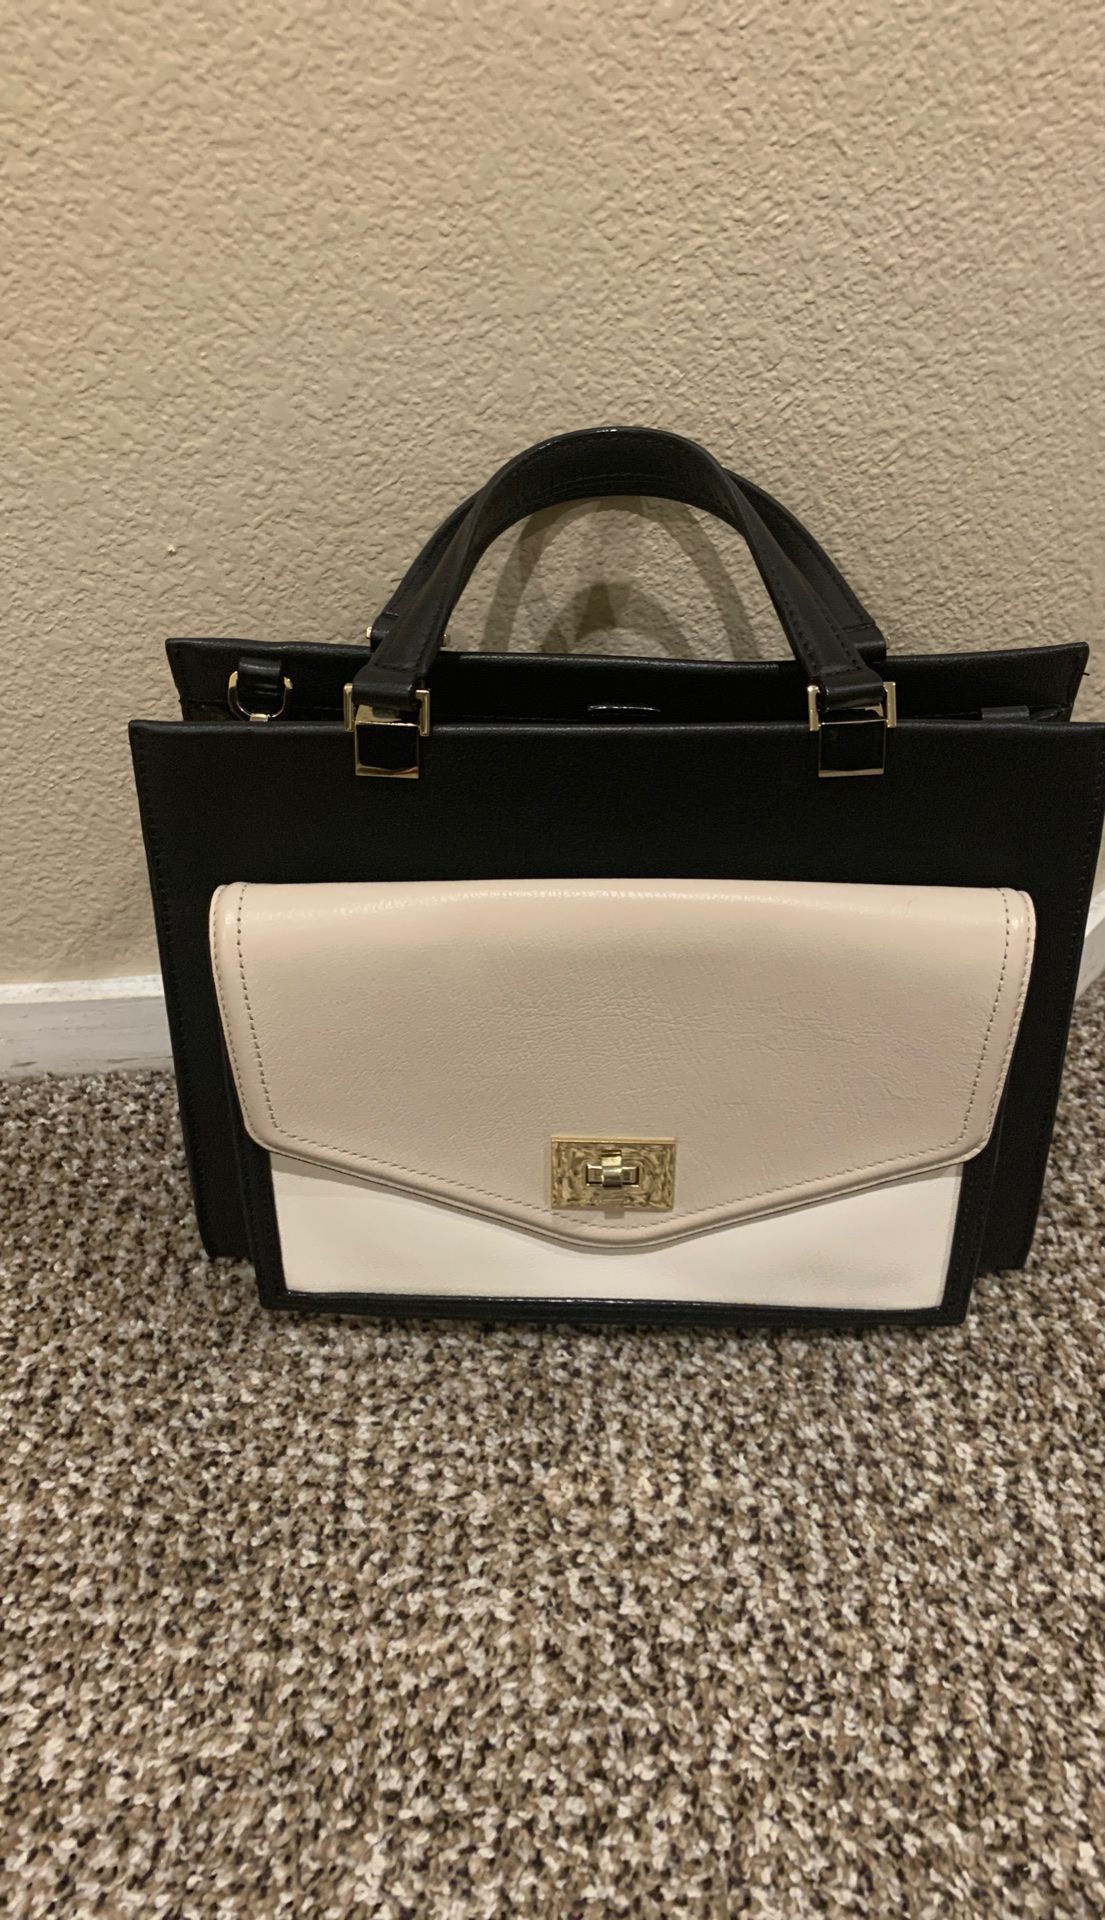 Kate spade purse in great condition